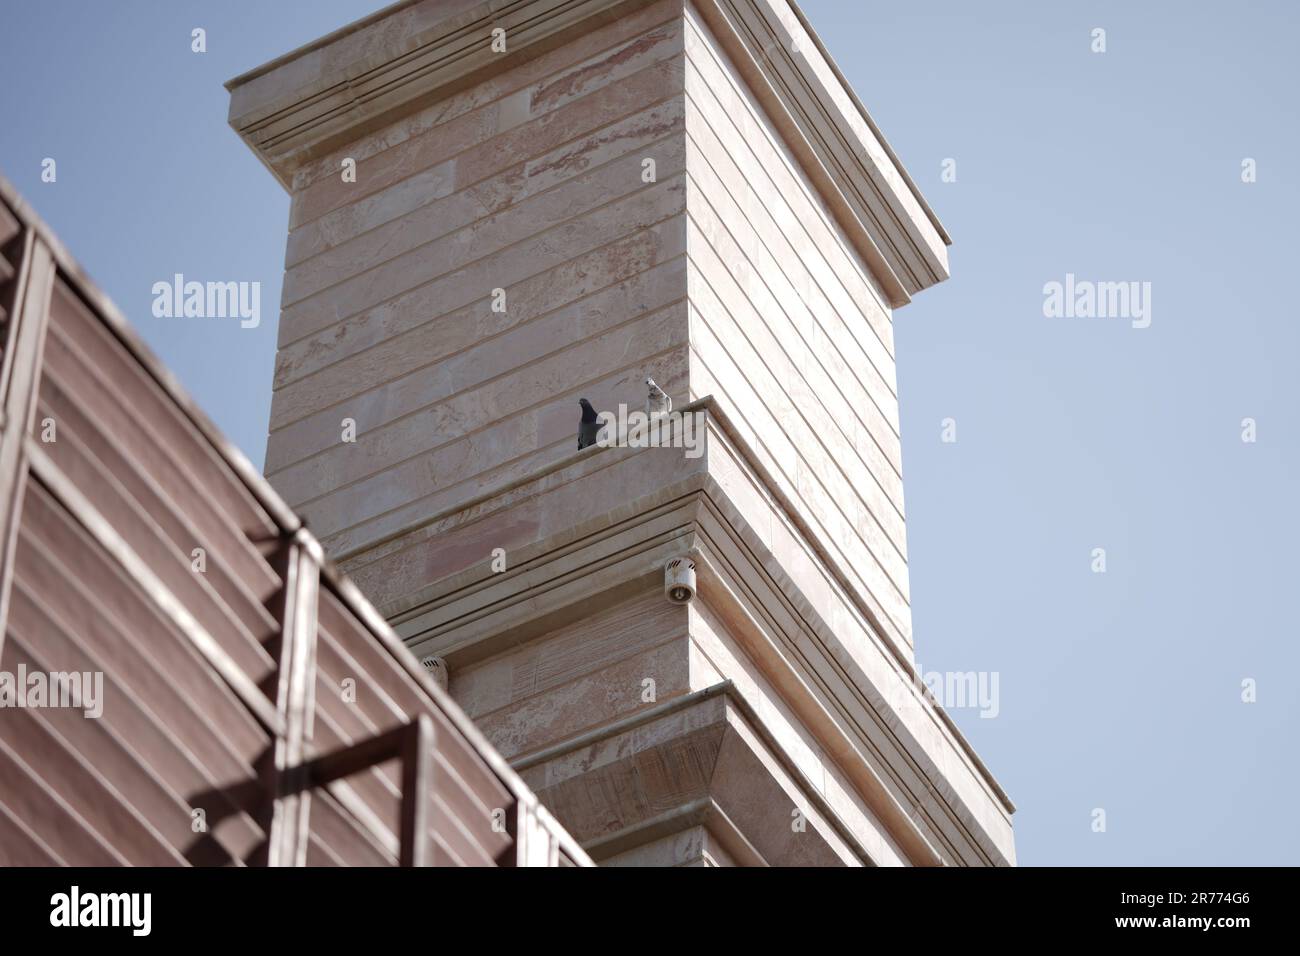 Two pigeons are standing above a house in Saudi Arabia, middle east. Stock Photo